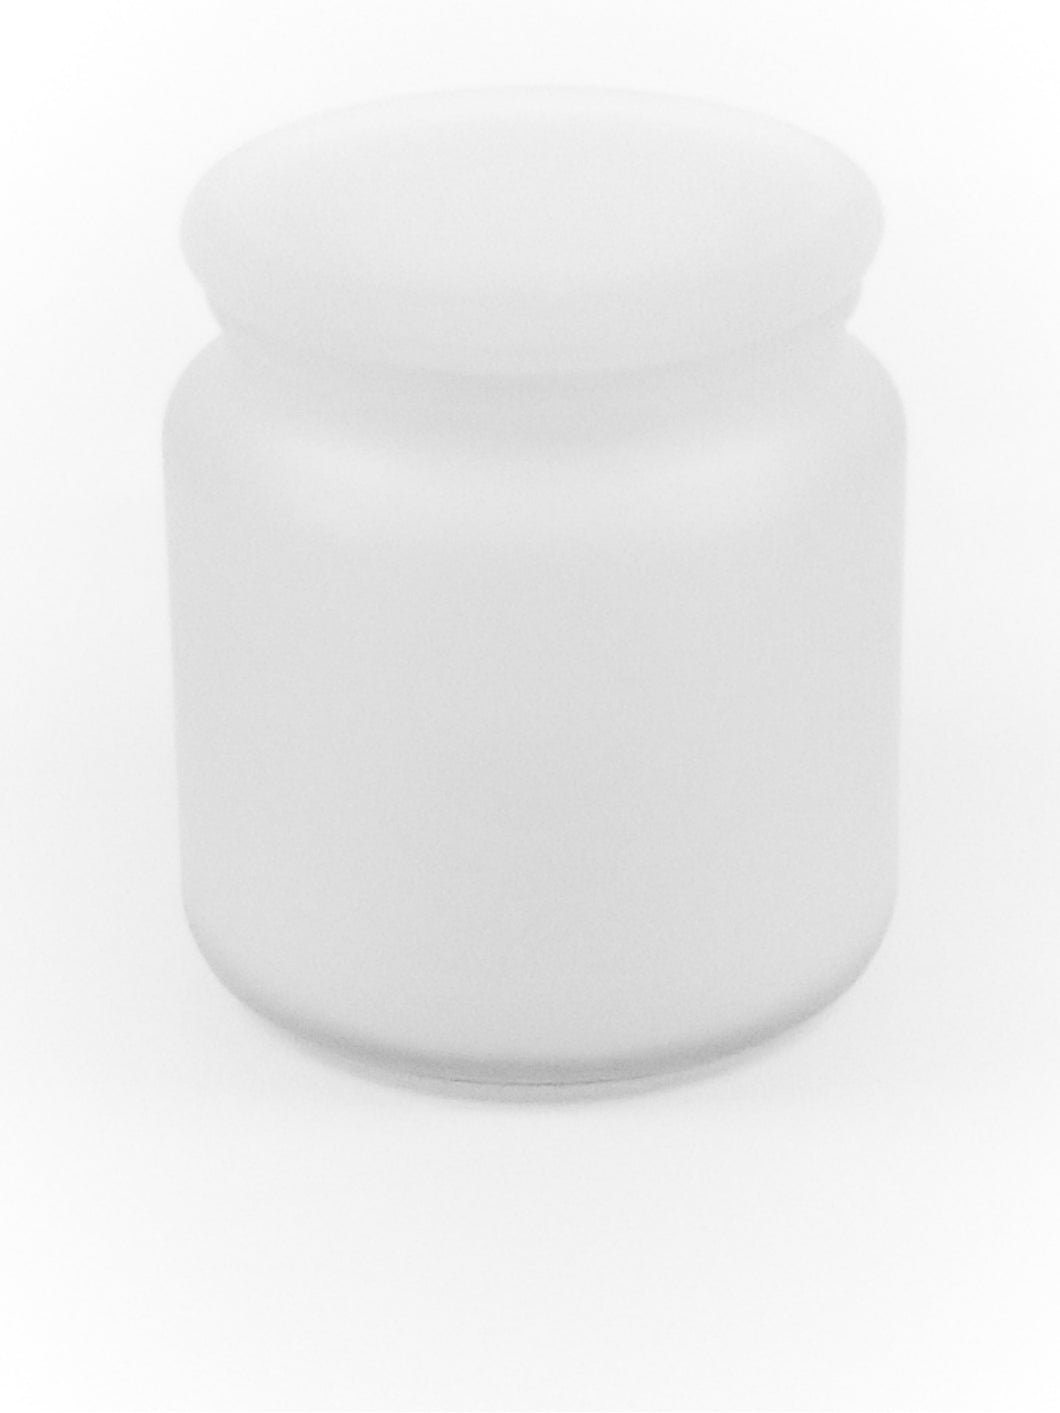 Apotho - Frosted White Candle Vessel